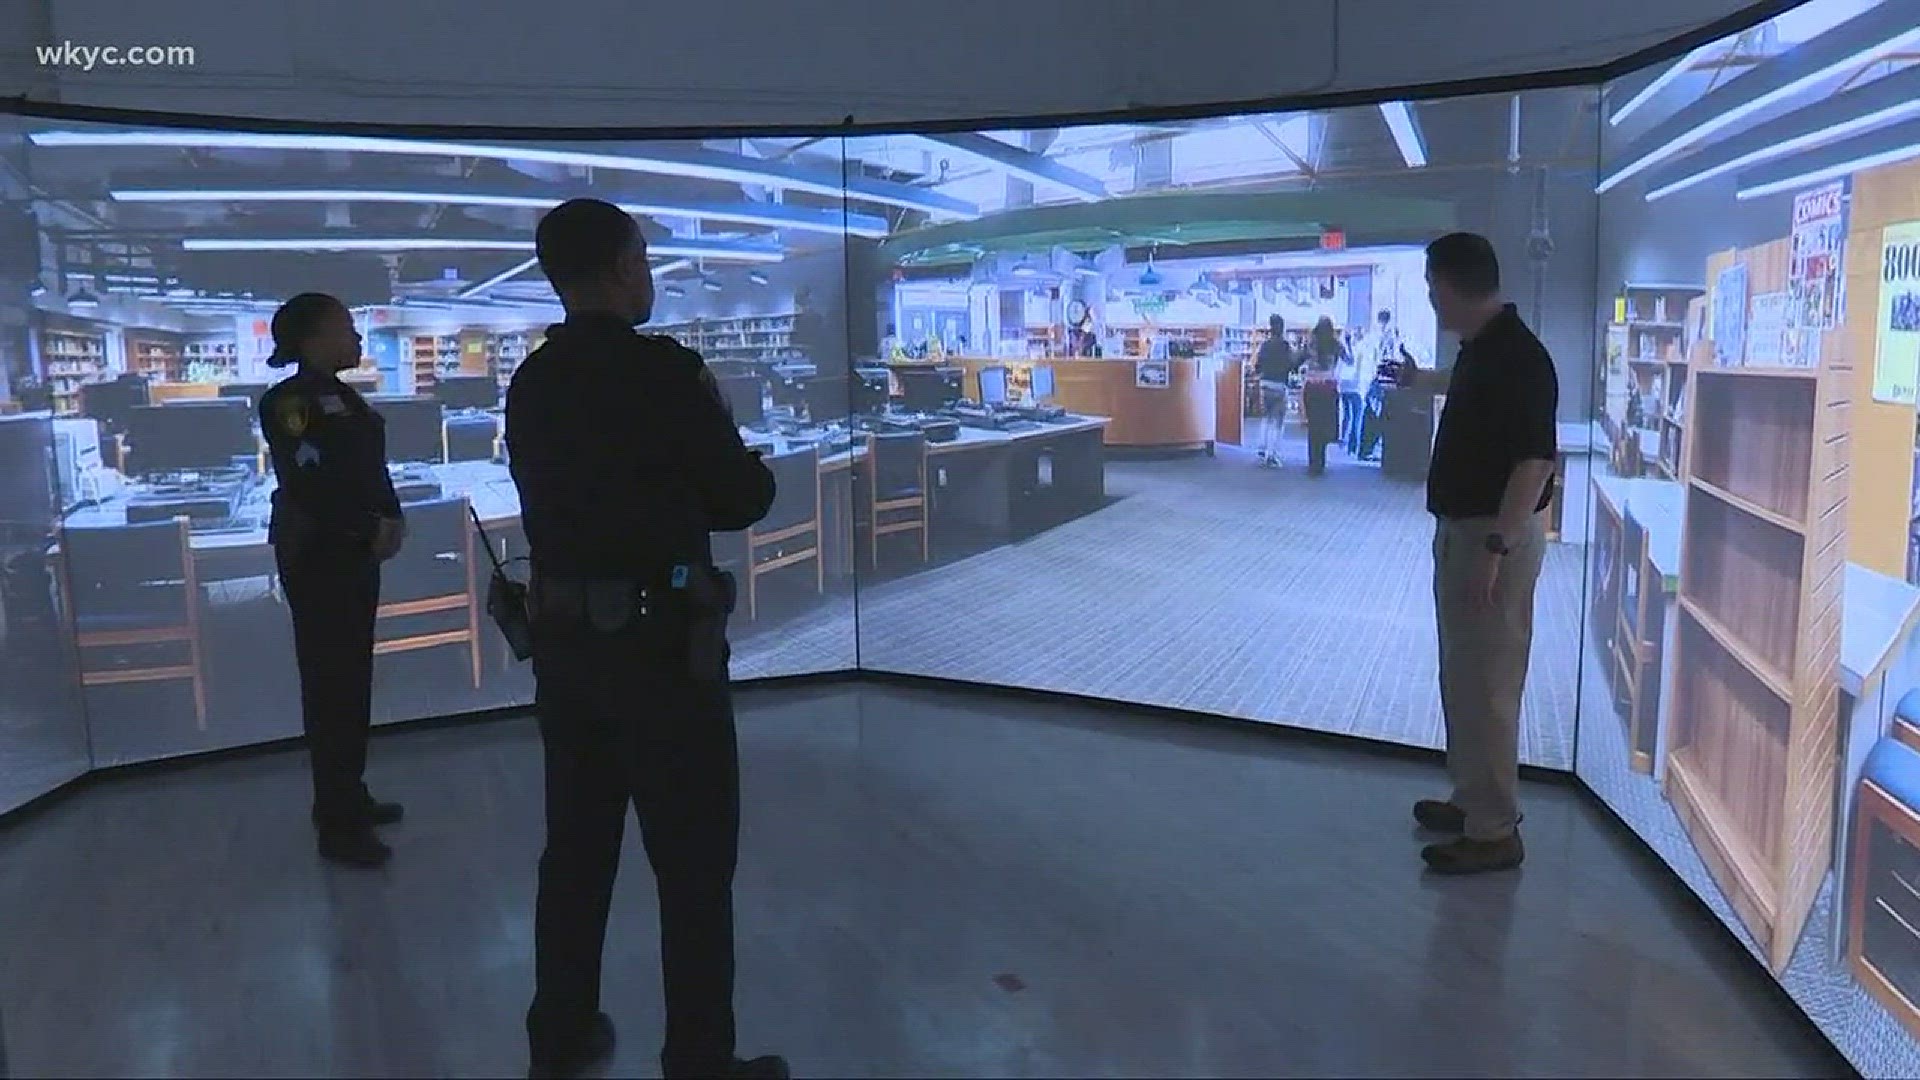 Local police officers using technology to train for school shootings